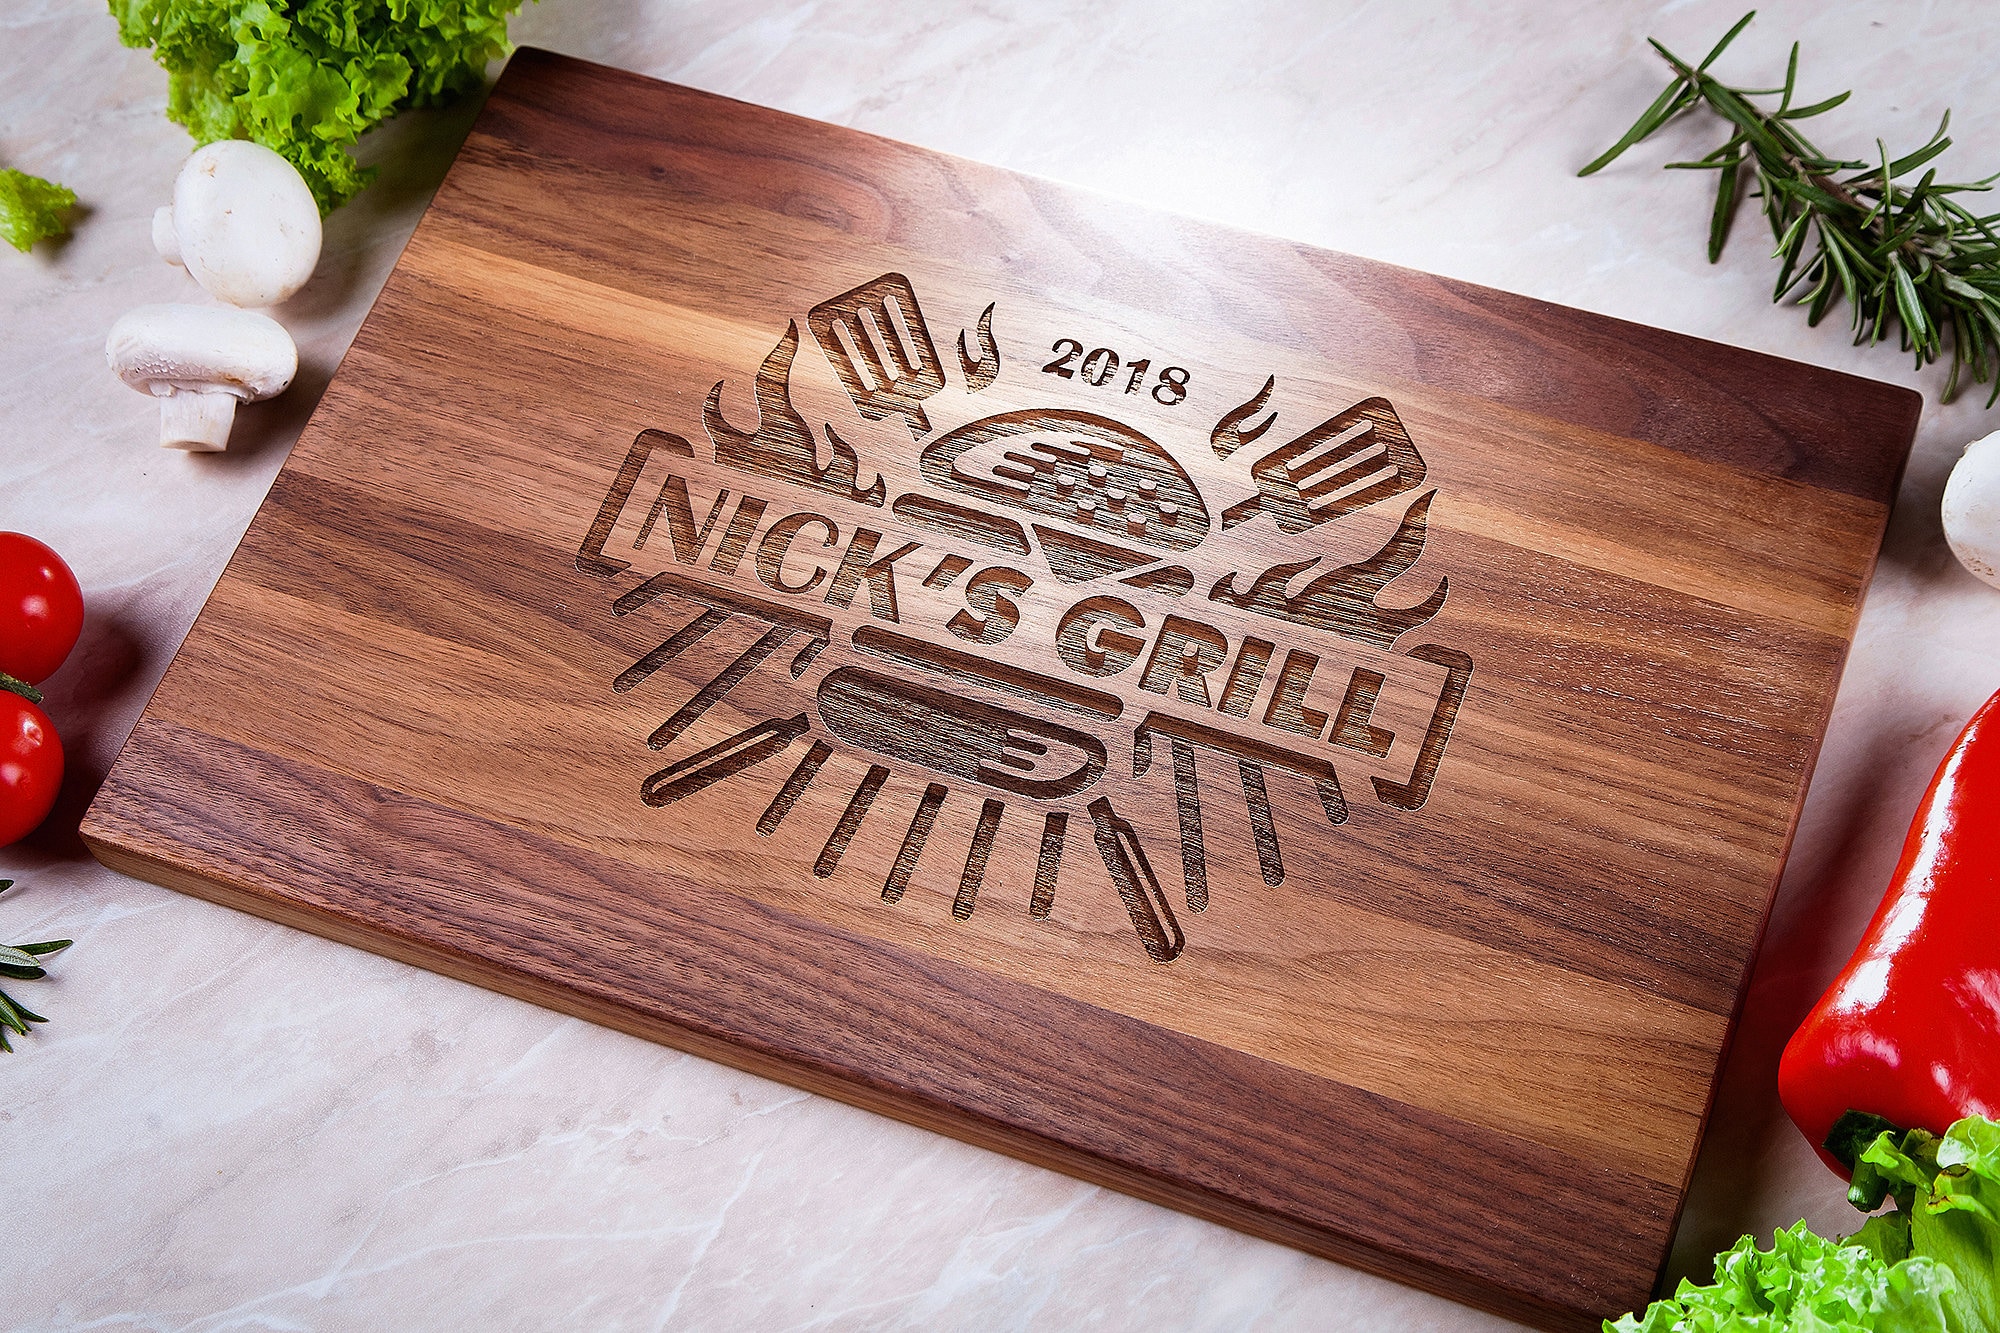 Personalized Cutting Board for the Expert Griller